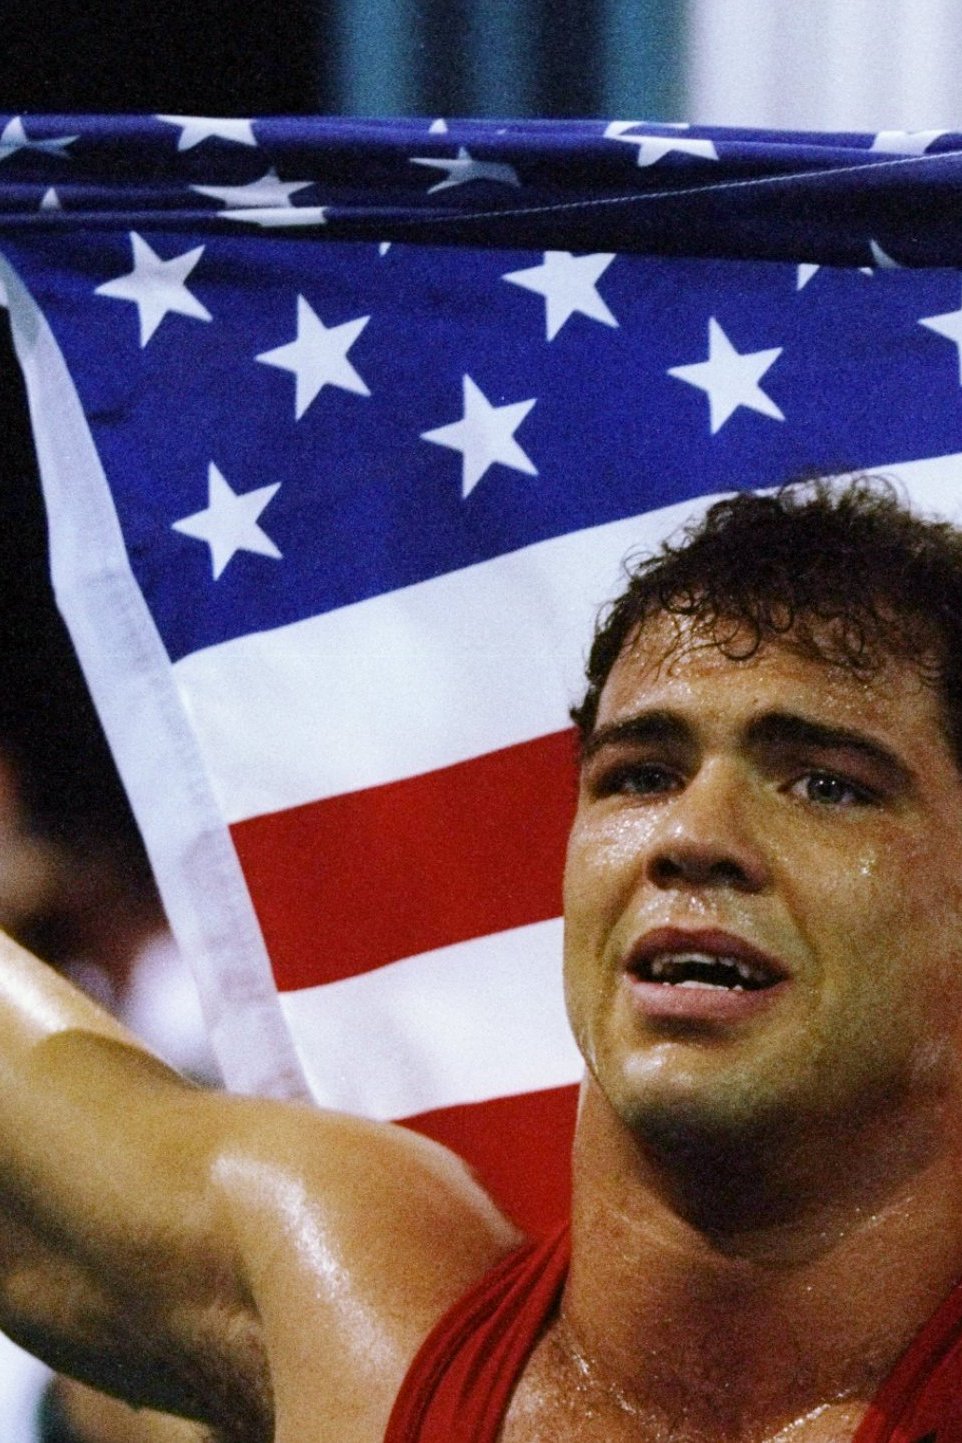 Kurt Angle reflects on gutsy gold medal victory 25 years later